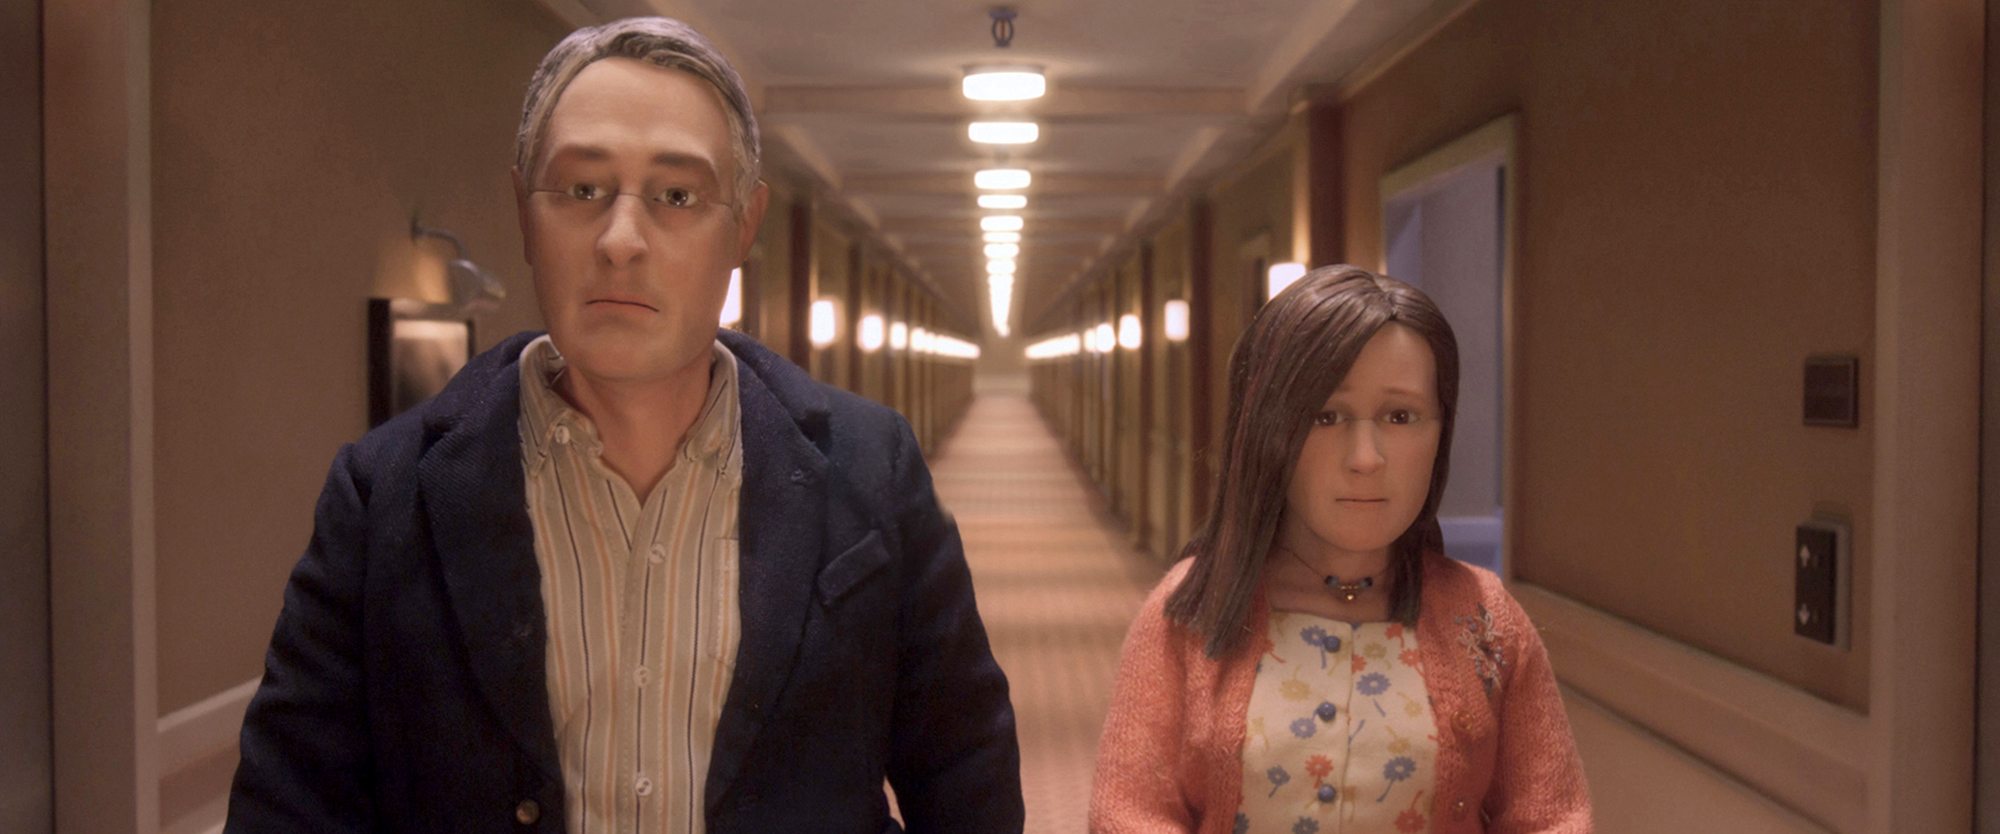 David Thewlis voices Michael Stone and Jennifer Jason Leigh voices Lisa Hesselman in the animated stop-motion film &quot;Anomalisa.&quot; (Paramount Pictures)